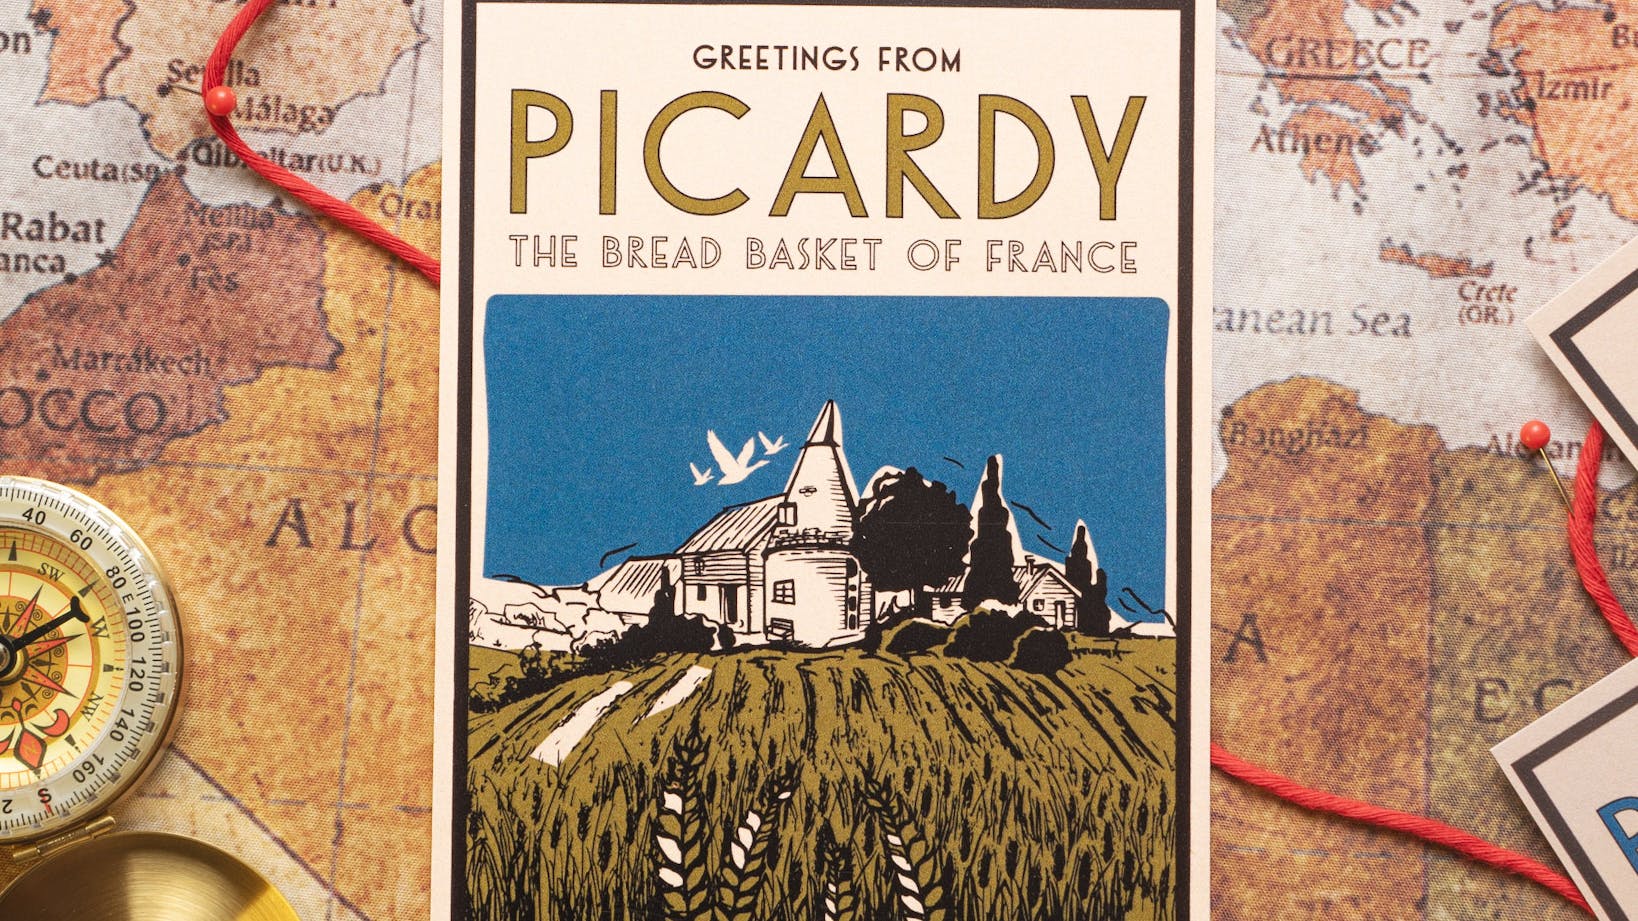 Albert’s French Adventures; Picardy